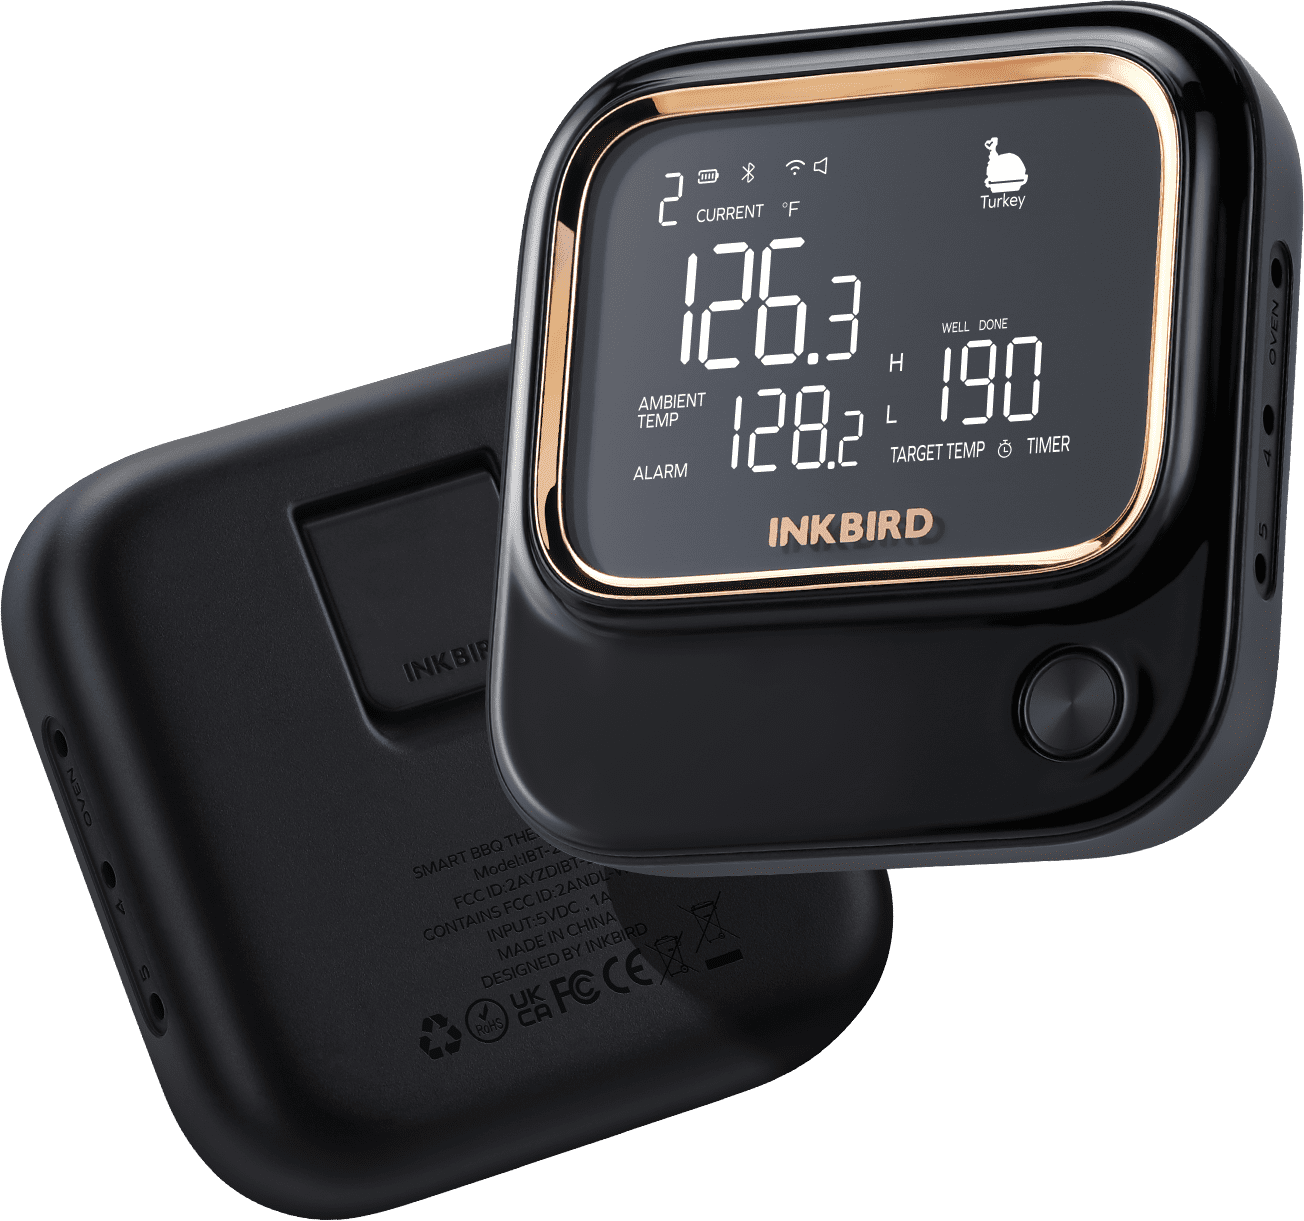 UNBOX/REVIEW INKBIRD (6 PROBE PORTS!!) 5G WI-FI Smart BBQ Thermometer